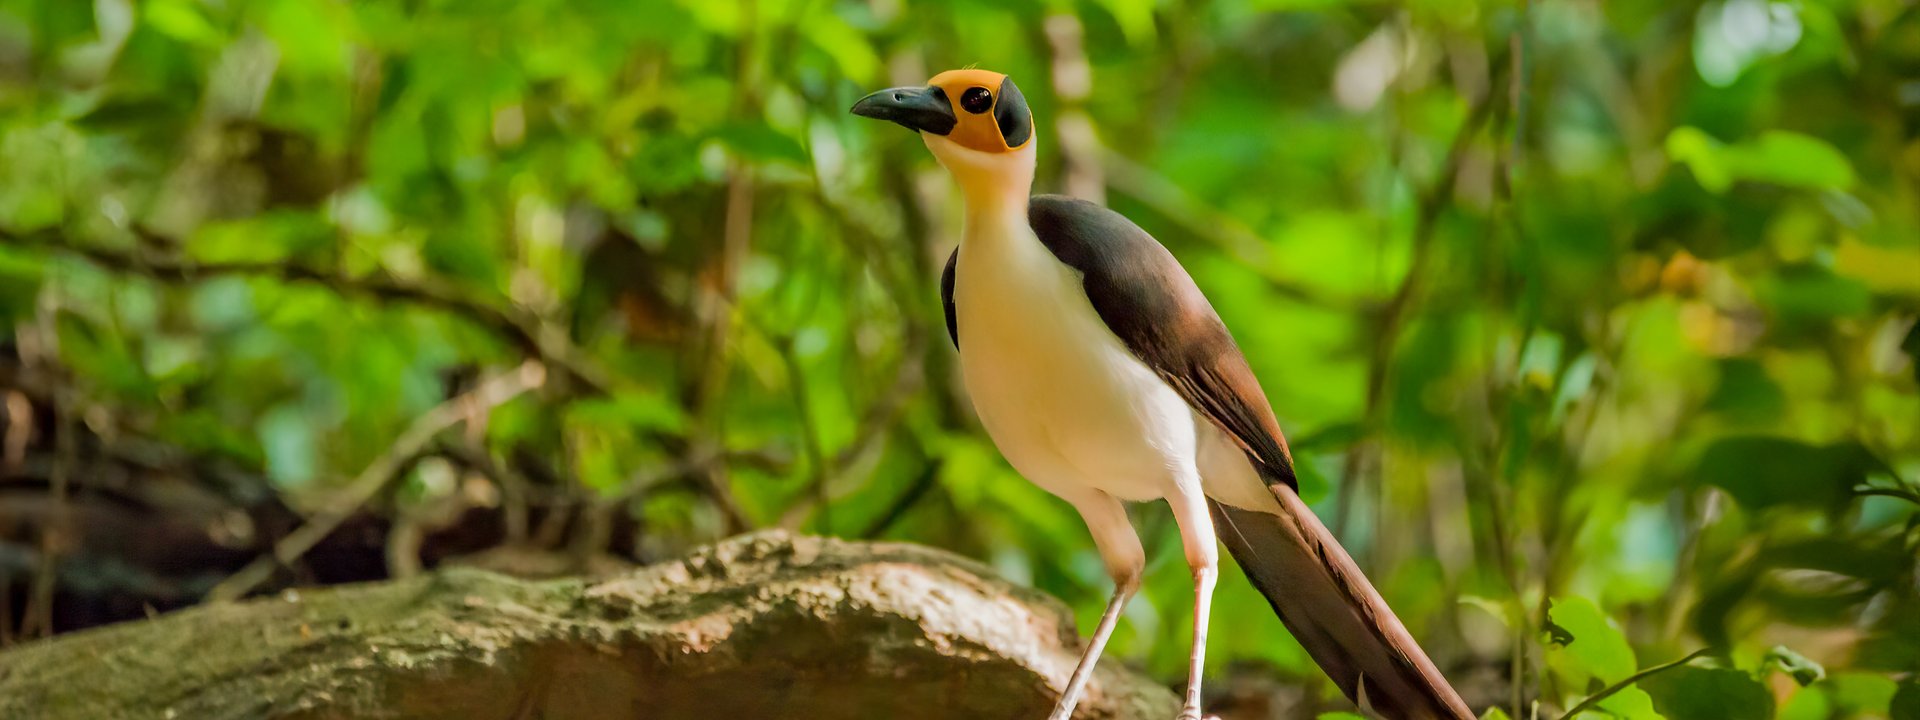 https://limosa-holidays-co-uk.s3.amazonaws.com/images/Yellow-headed_Picathartes_Photo_c.609a06f0.fill-1920x720.jpg